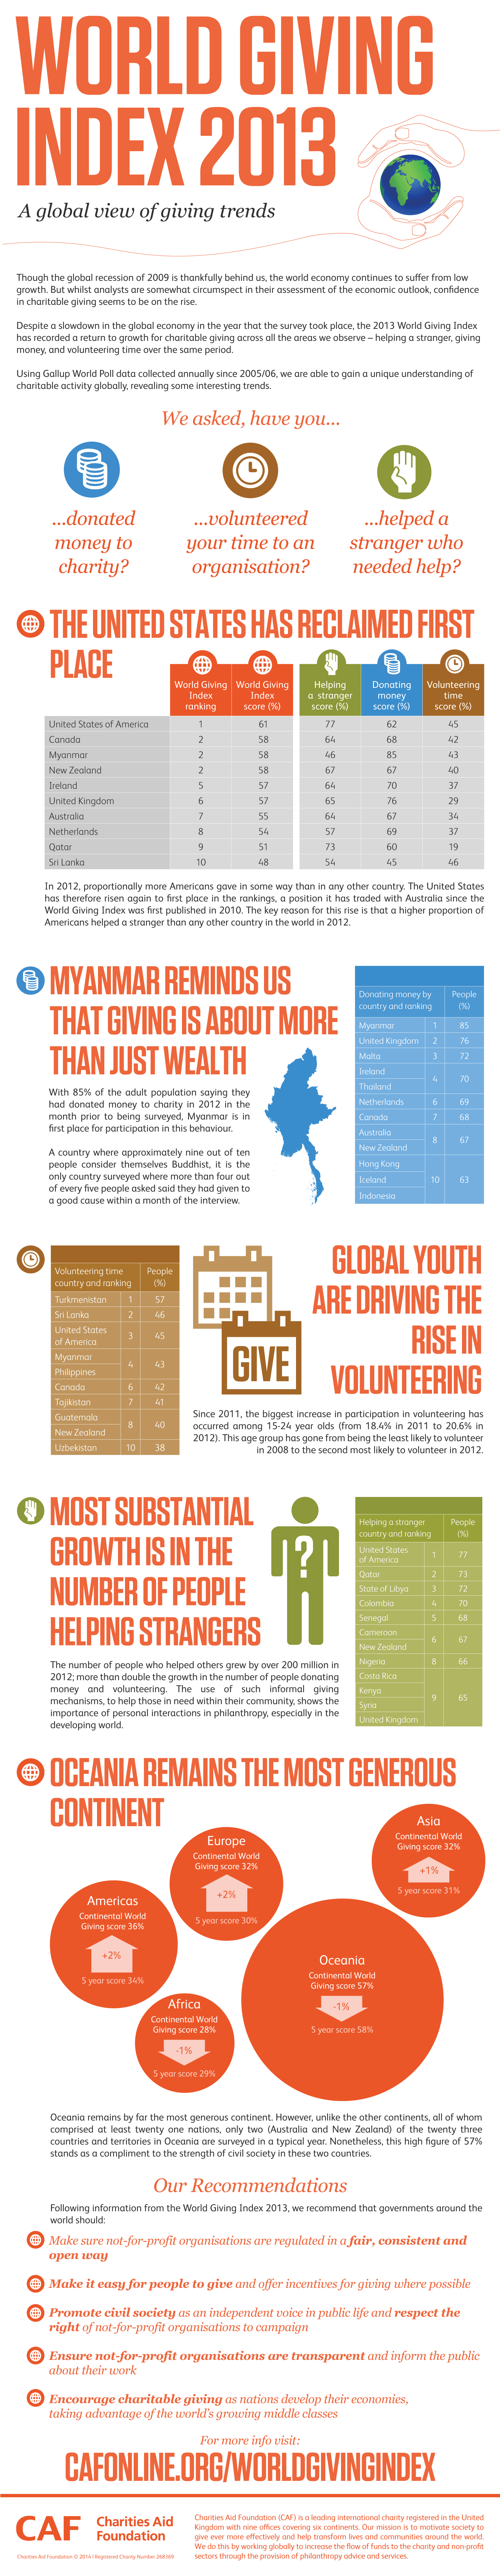 caf world giving index infographic charity.png